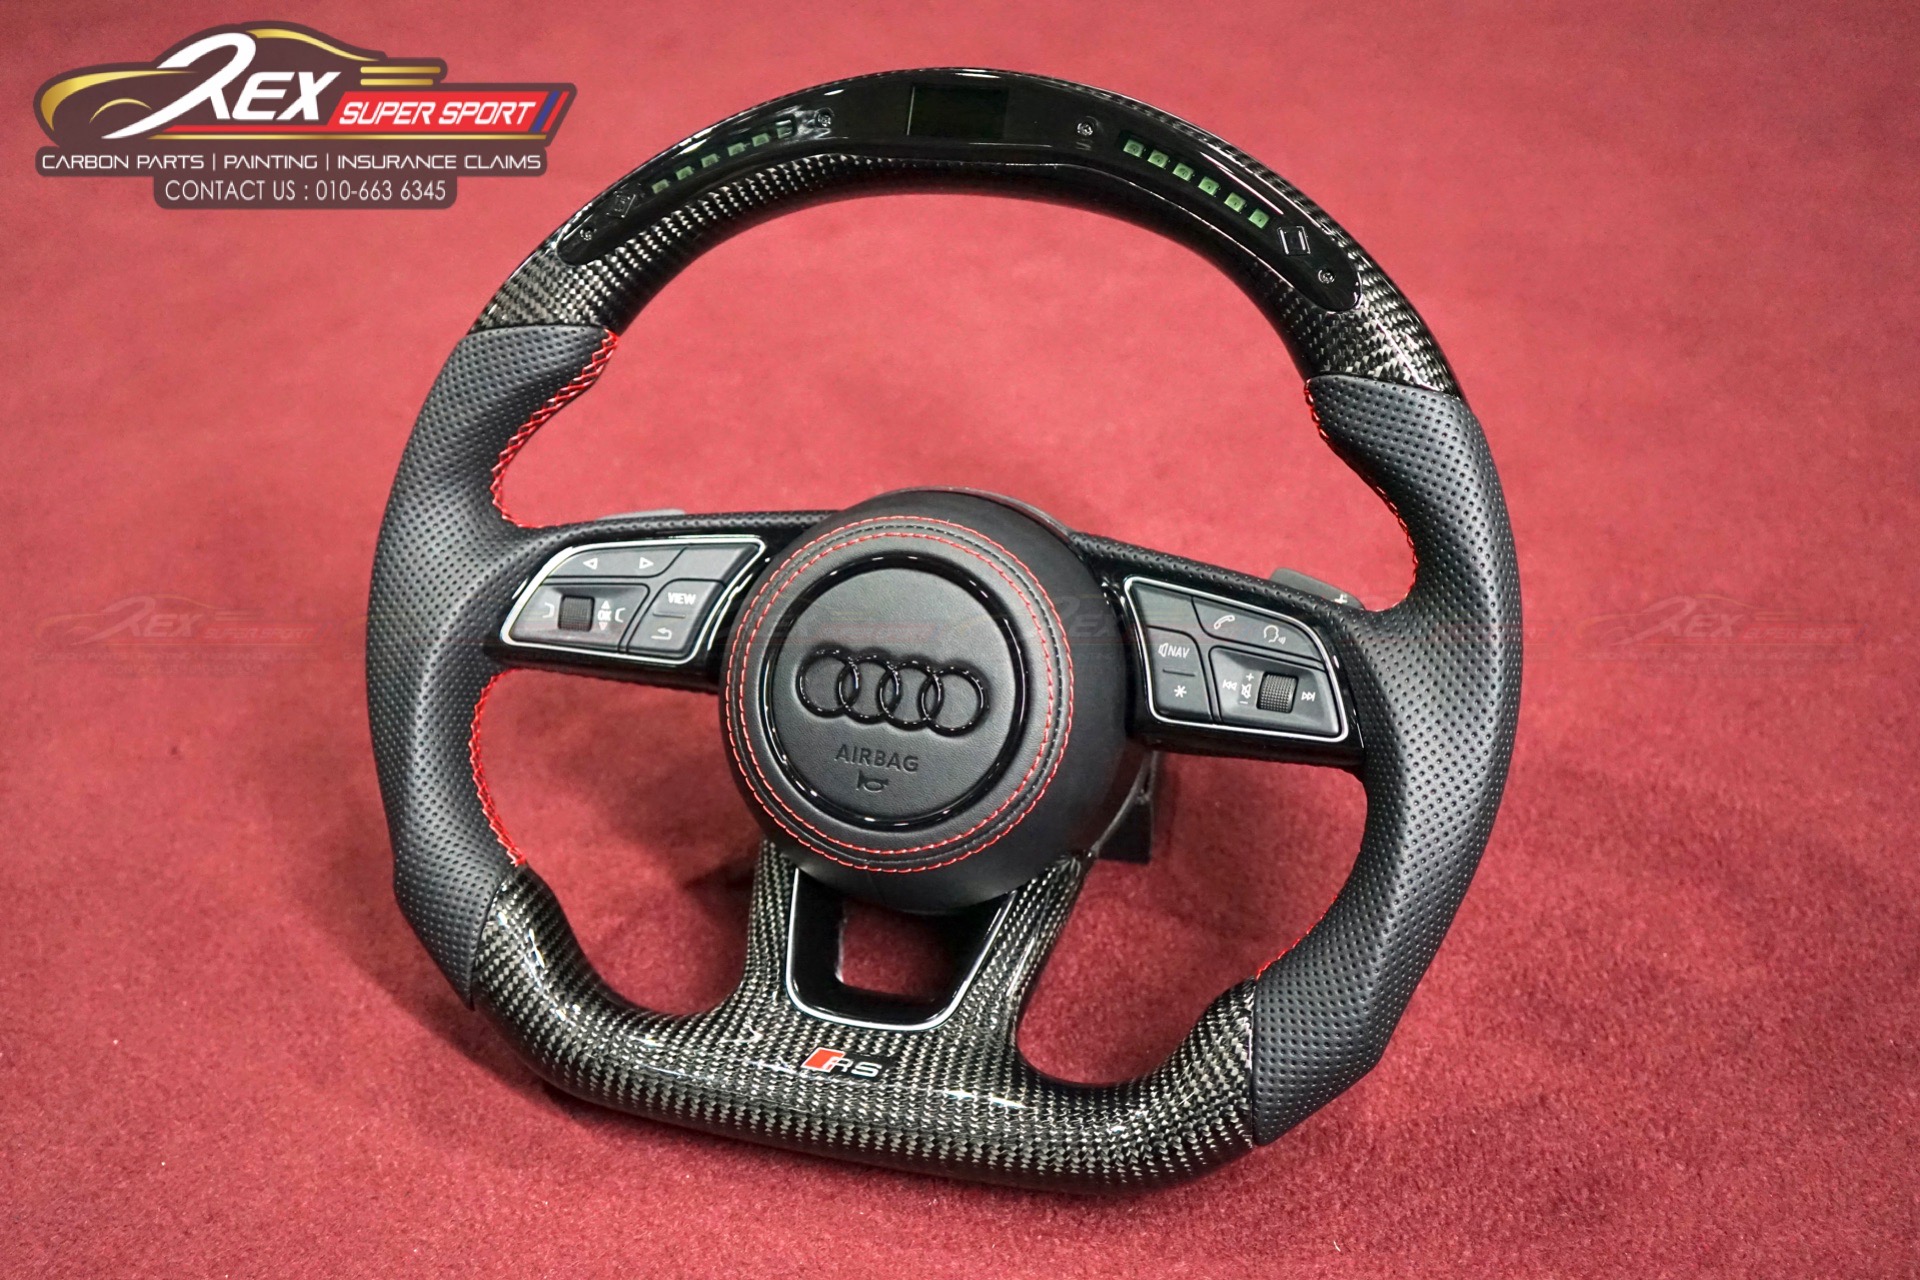 Audi Steering Logo at Rs 2999/piece